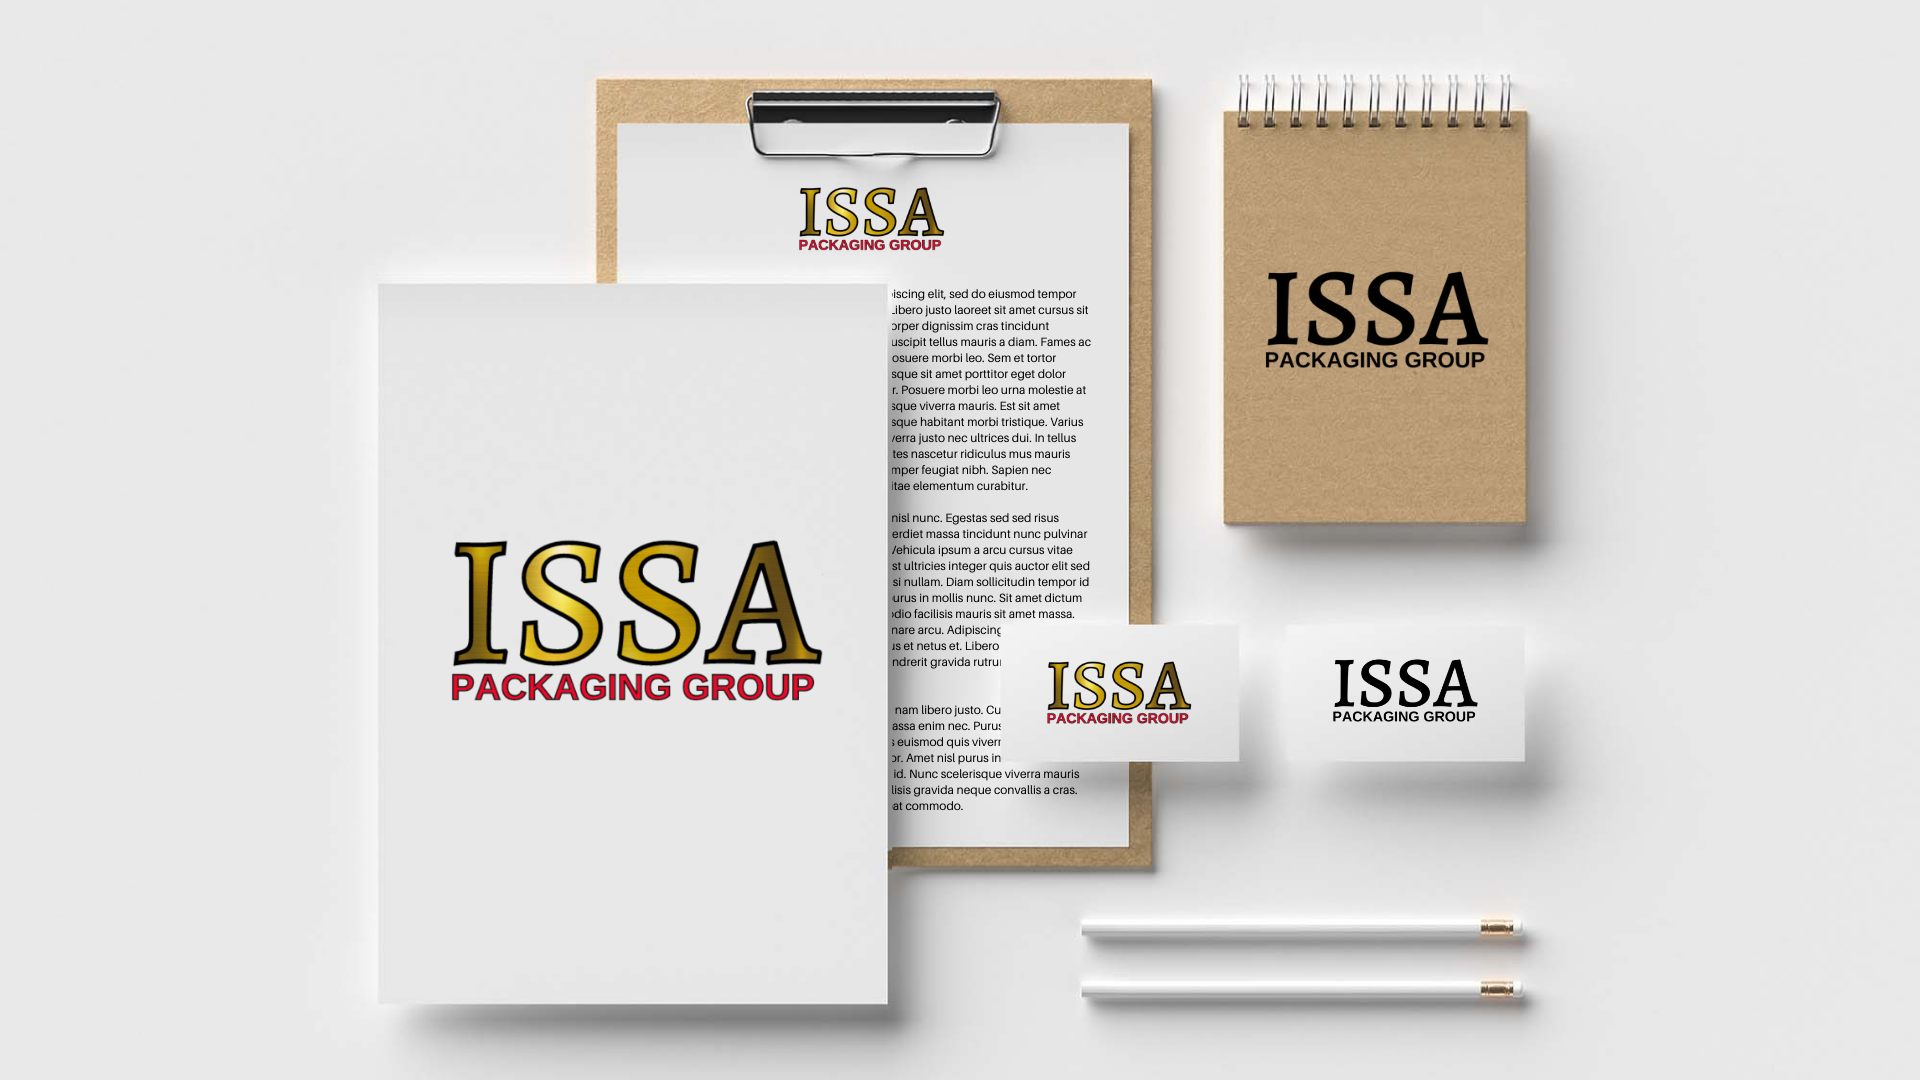 ISSA Packaging Group